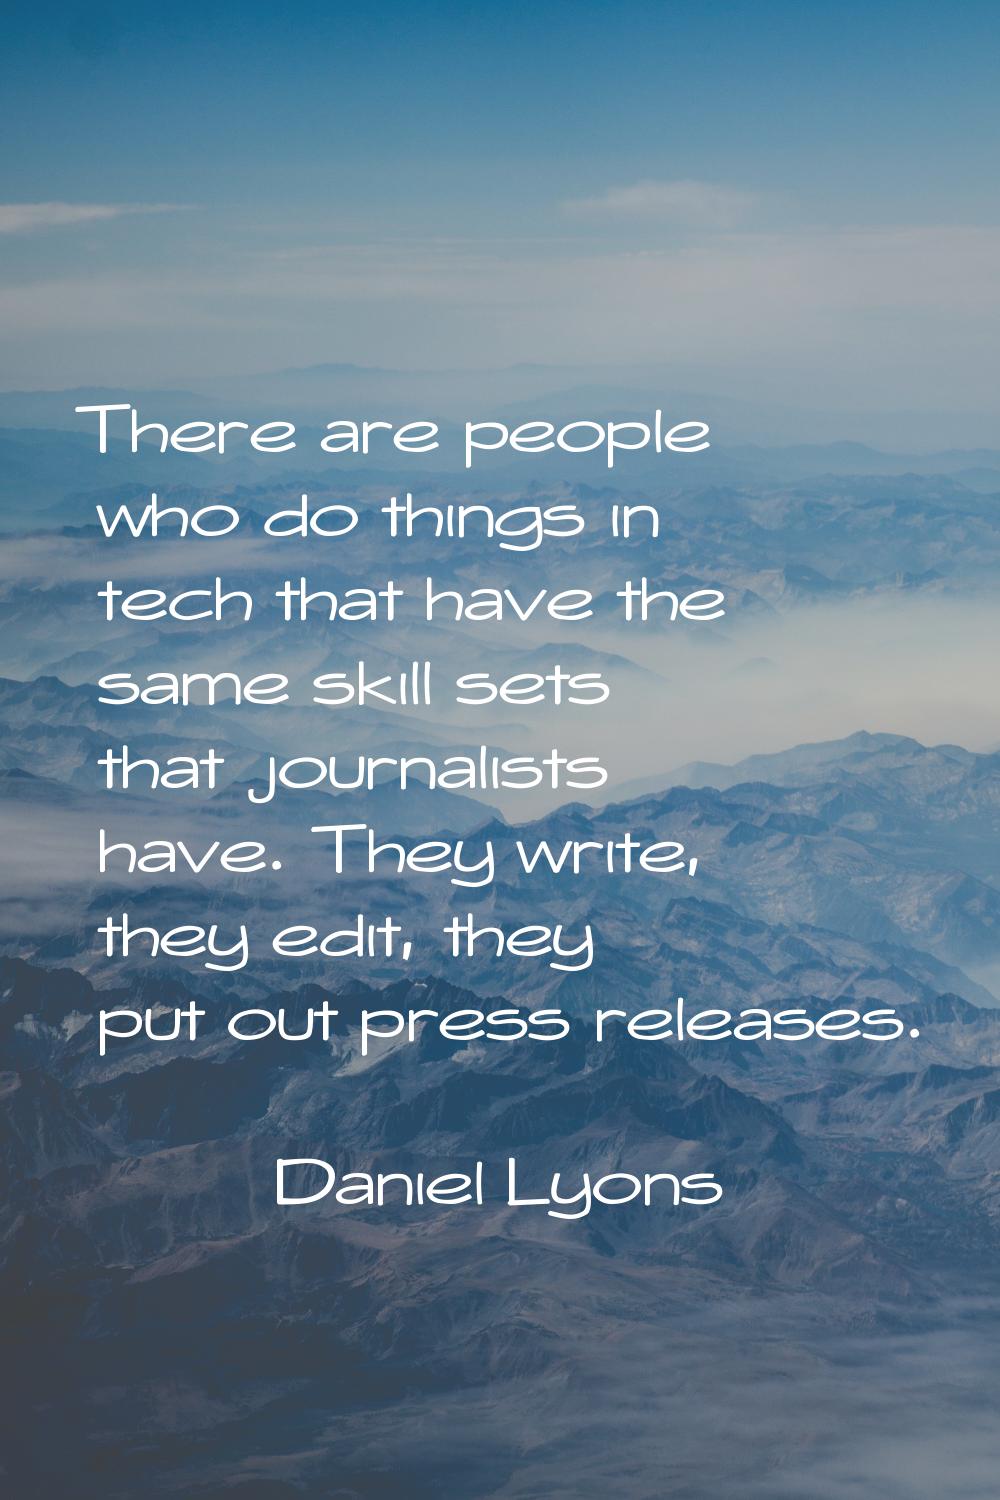 There are people who do things in tech that have the same skill sets that journalists have. They wr